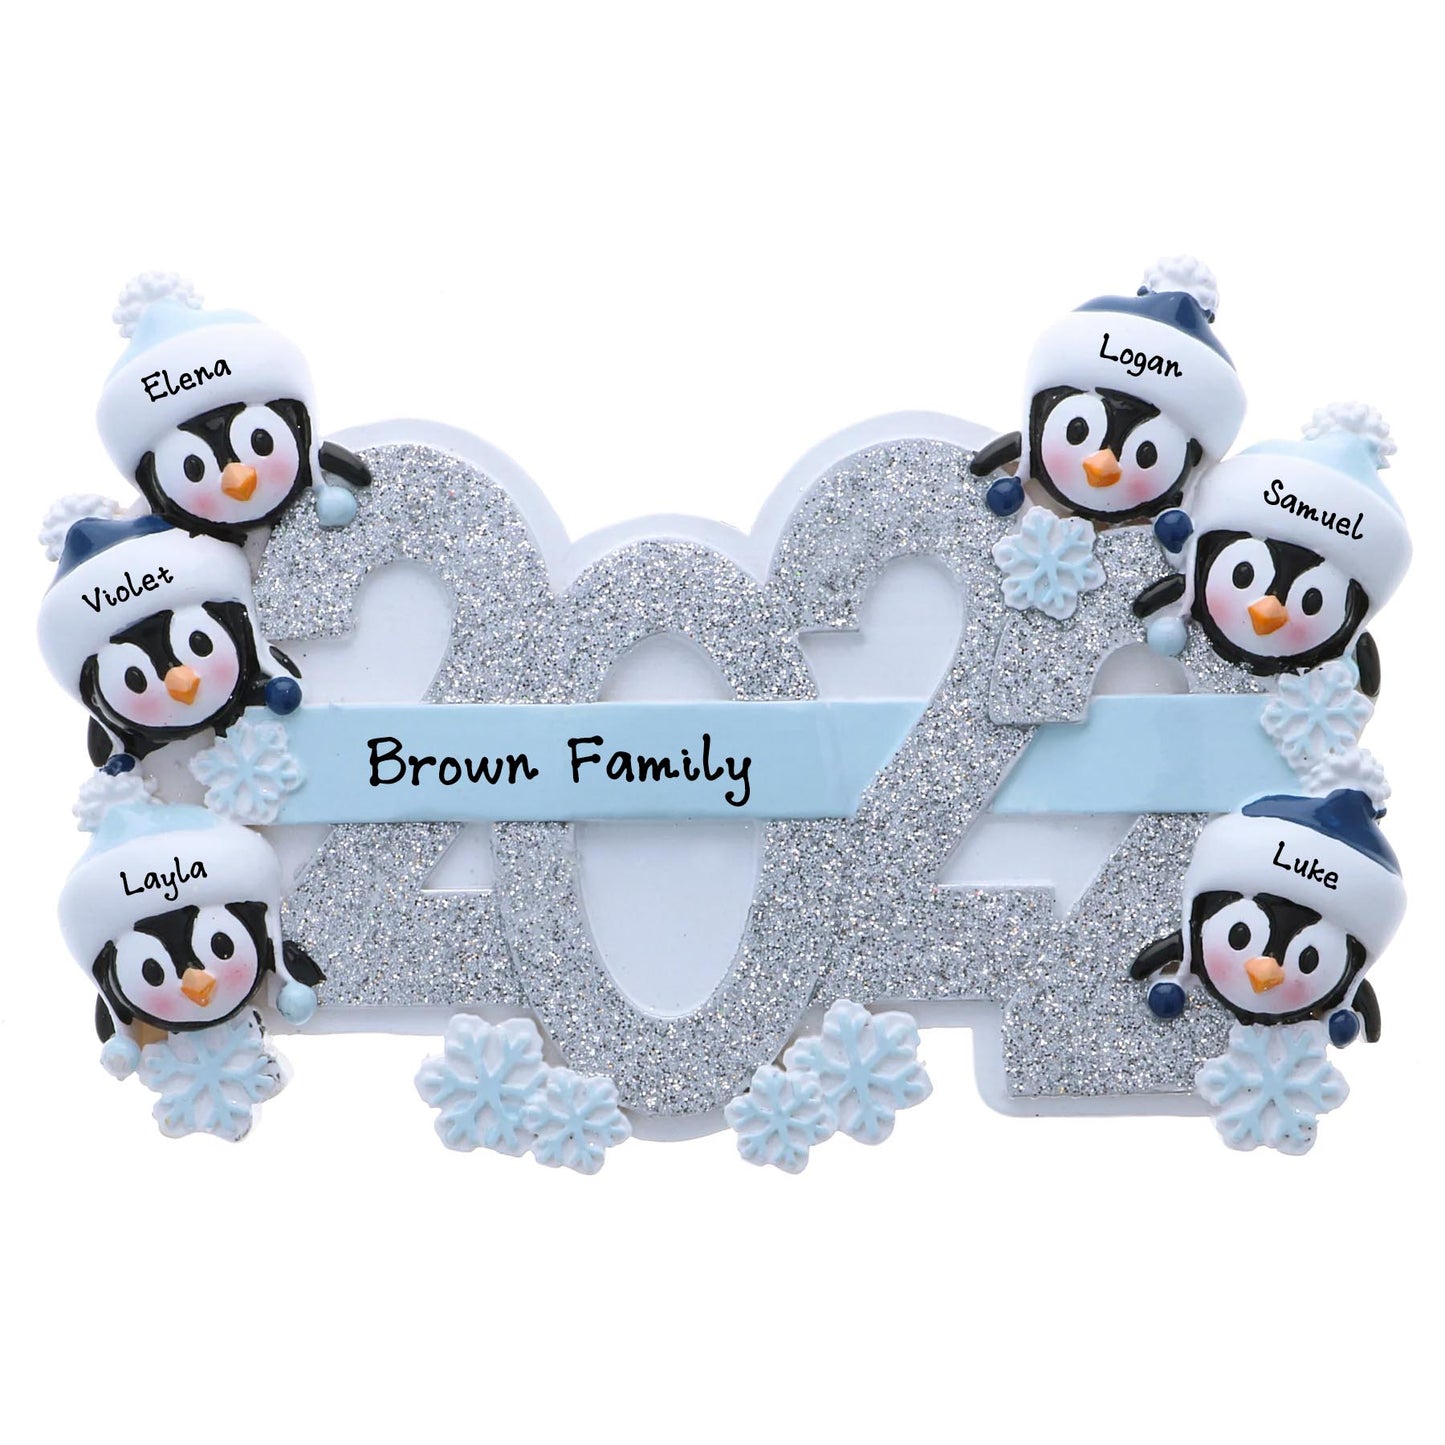 Personalized Family Christmas Ornament (Family of 6)